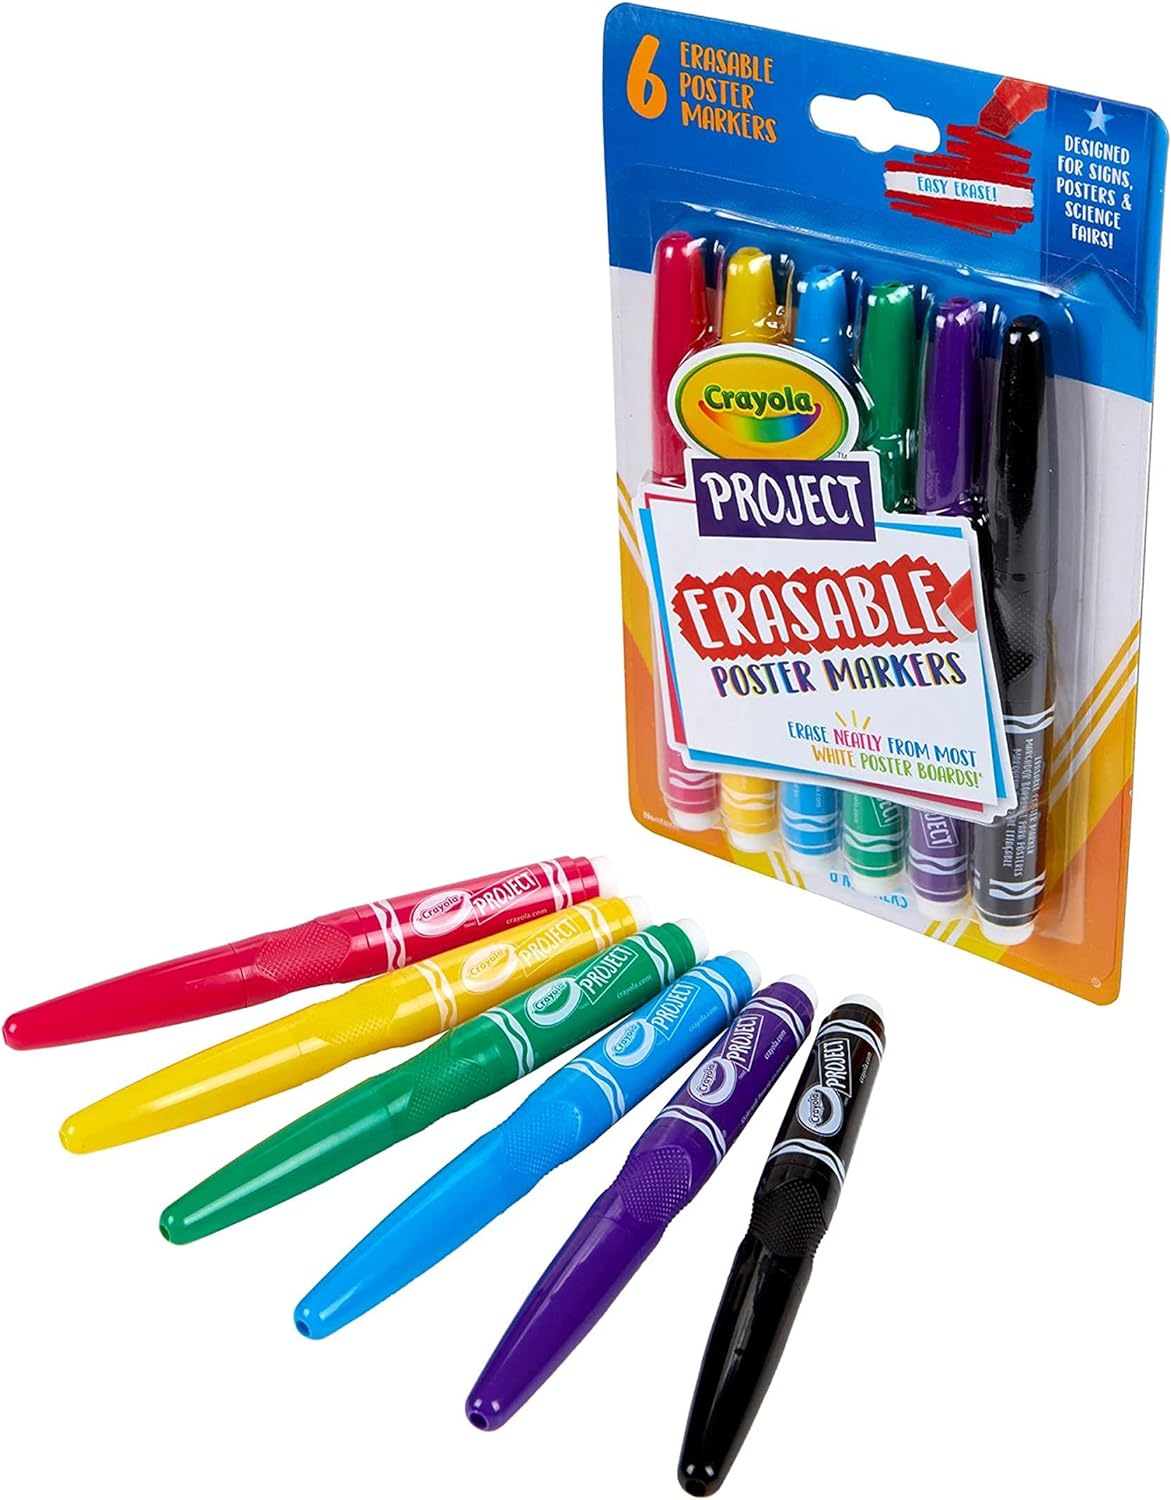 Crayola Project Erasable Poster Markers - Pack of 6